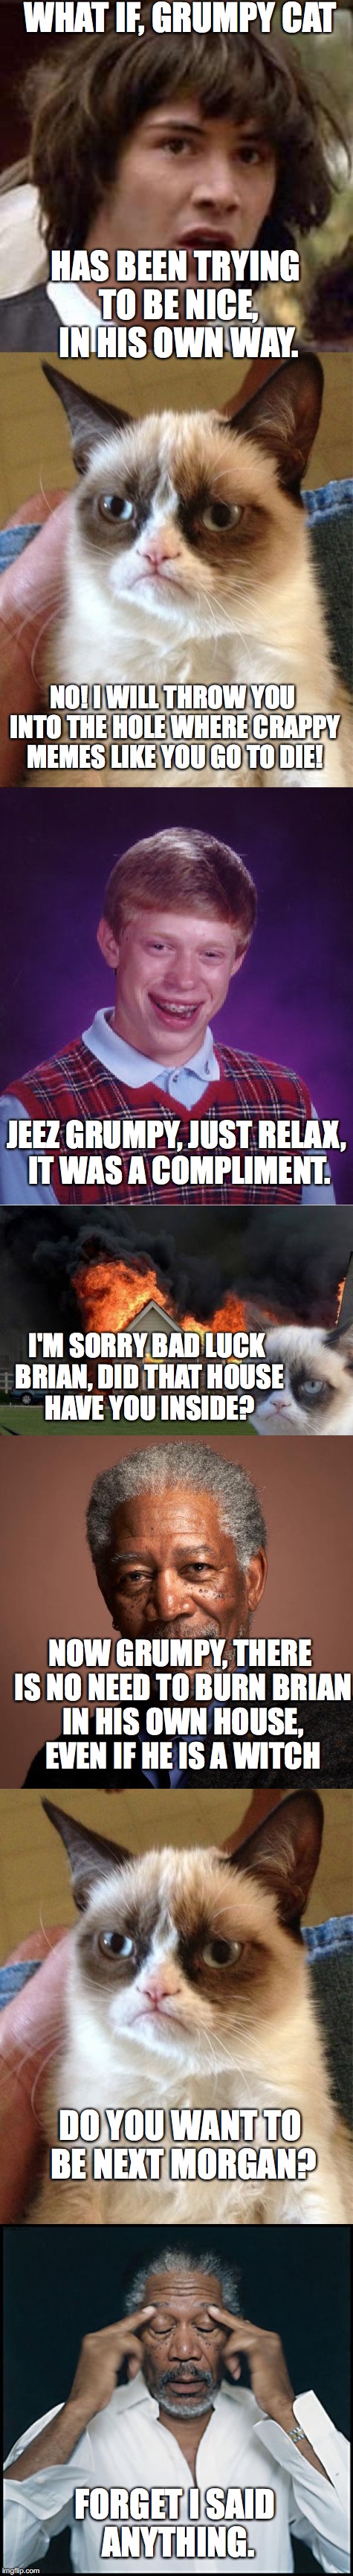 You're average conversation between meme templates. | WHAT IF, GRUMPY CAT; HAS BEEN TRYING TO BE NICE, IN HIS OWN WAY. NO! I WILL THROW YOU INTO THE HOLE WHERE CRAPPY MEMES LIKE YOU GO TO DIE! JEEZ GRUMPY, JUST RELAX, IT WAS A COMPLIMENT. I'M SORRY BAD LUCK BRIAN, DID THAT HOUSE HAVE YOU INSIDE? NOW GRUMPY, THERE IS NO NEED TO BURN BRIAN IN HIS OWN HOUSE, EVEN IF HE IS A WITCH; DO YOU WANT TO BE NEXT MORGAN? FORGET I SAID ANYTHING. | image tagged in memes,funny,morgan freeman,grumpy cat,bad luck brian,conspiracy keanu | made w/ Imgflip meme maker